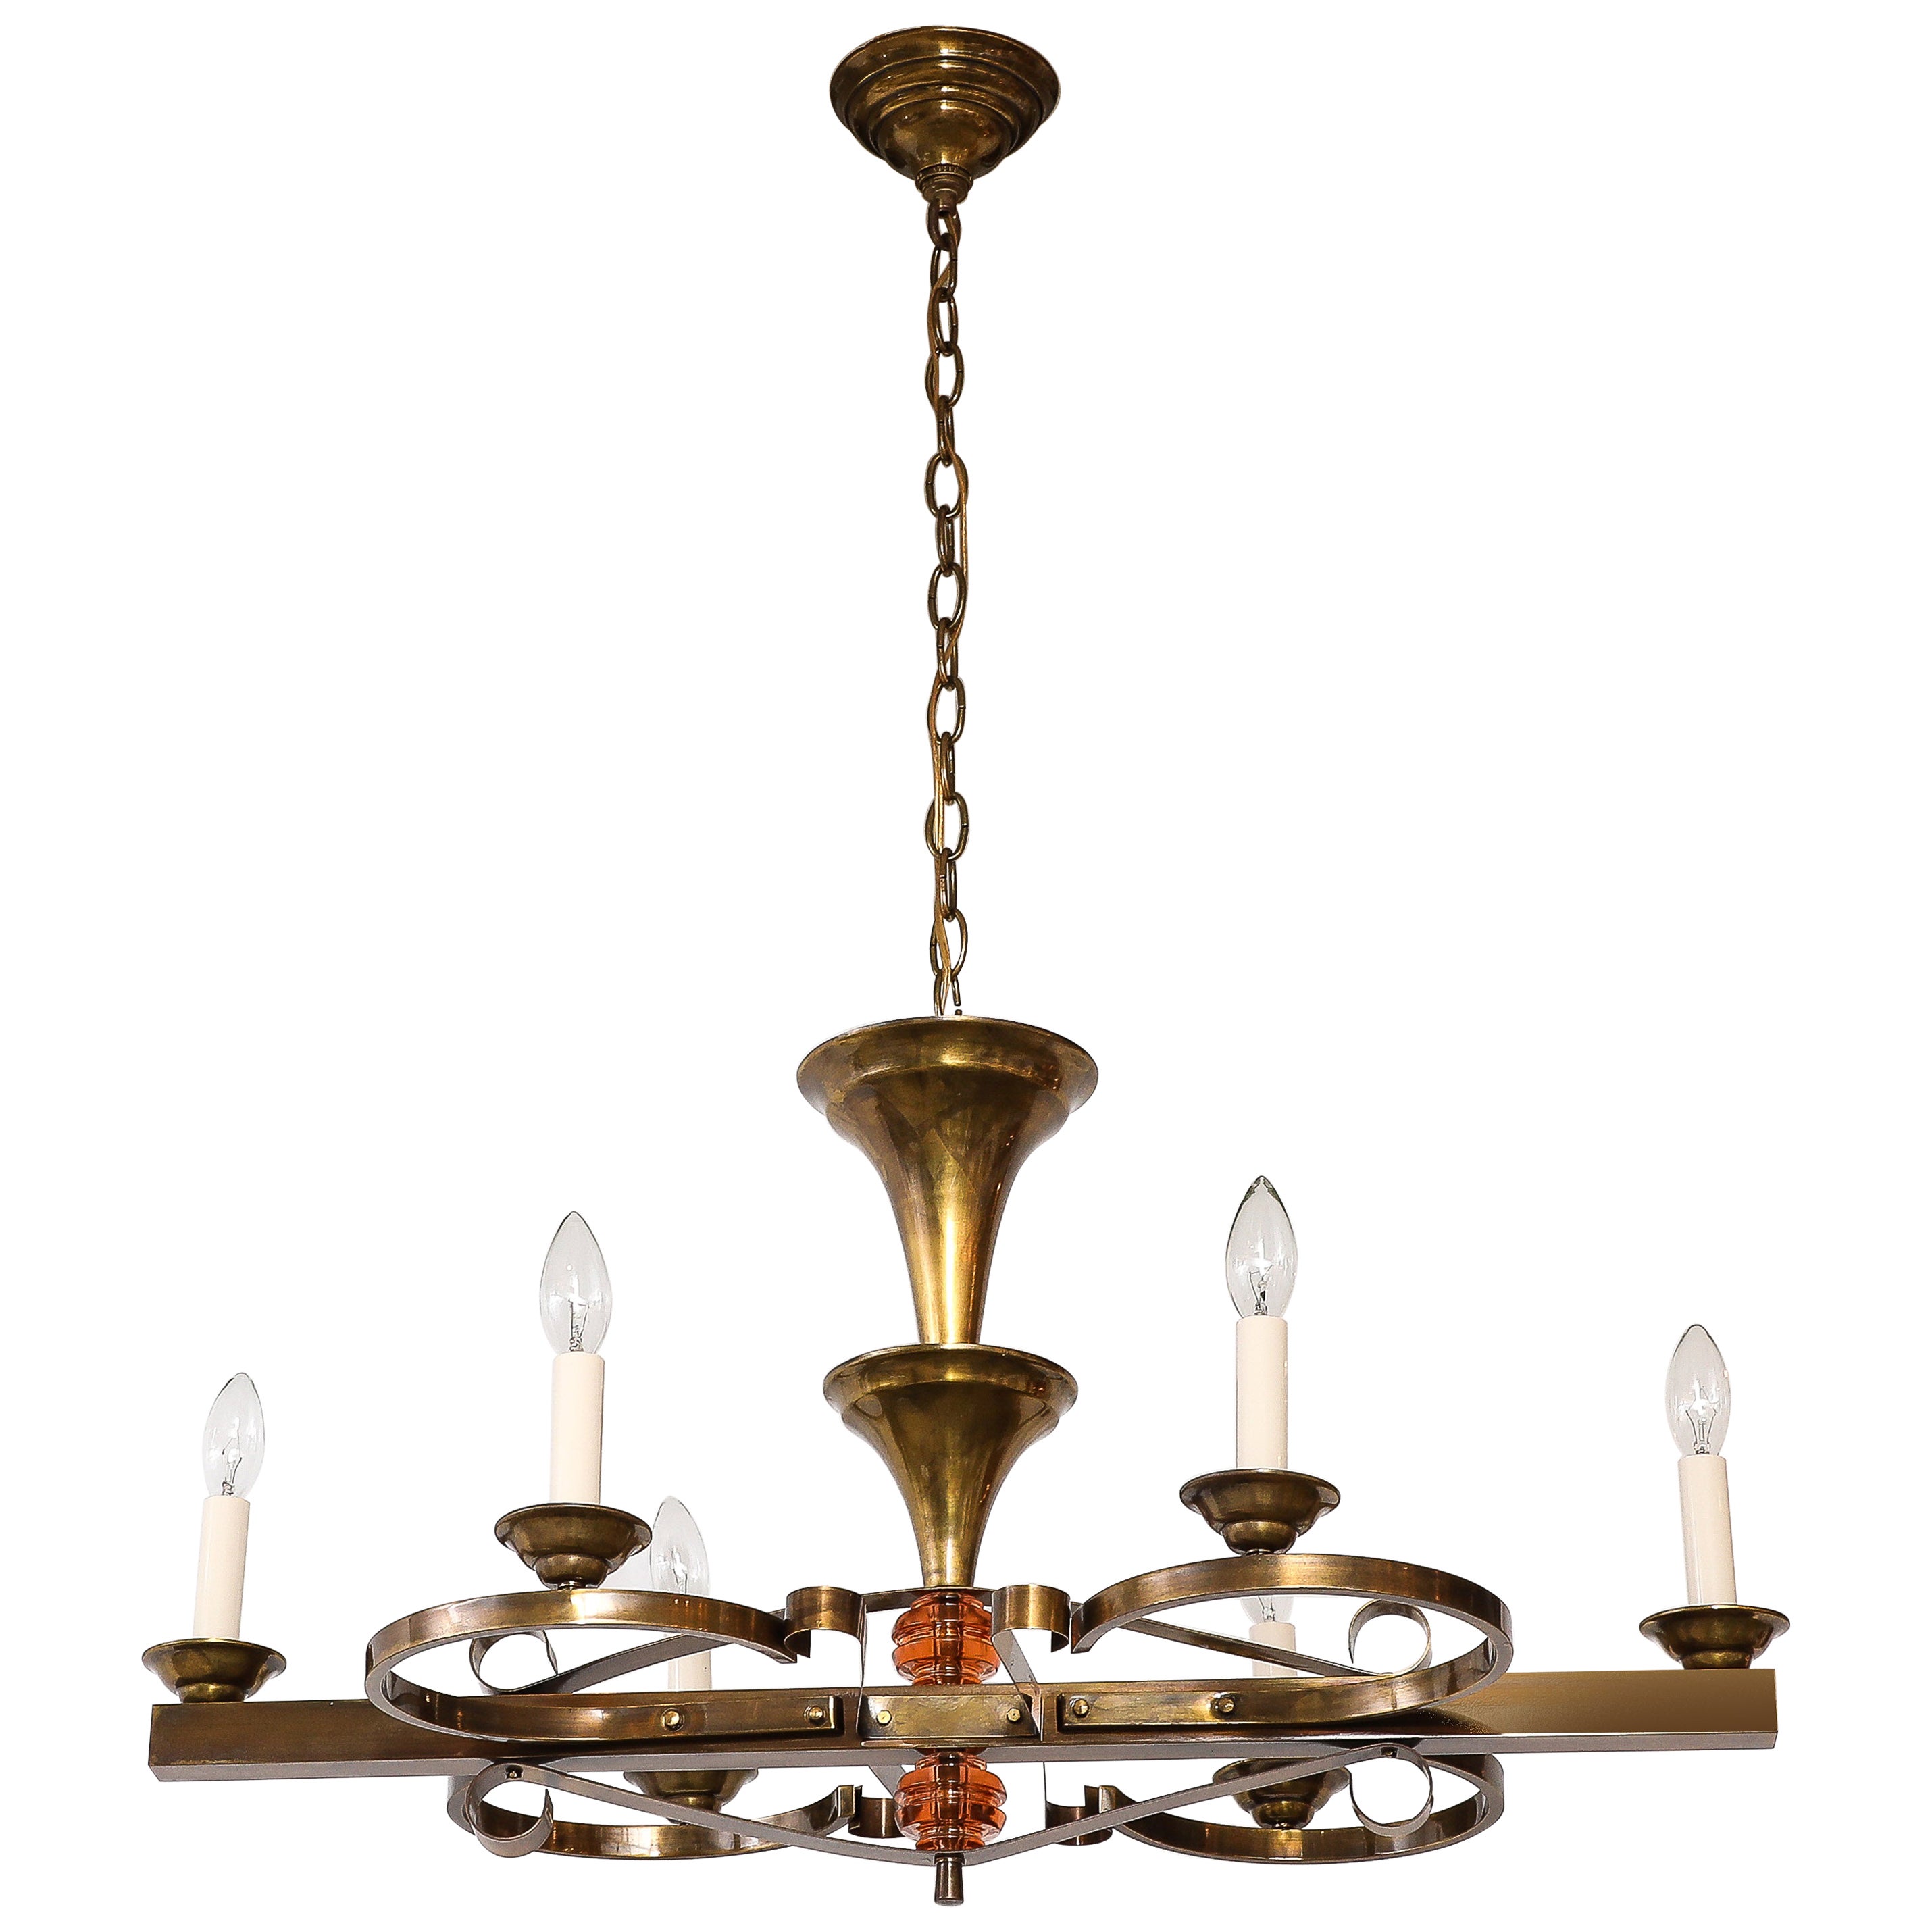 1940's French Art-Deco 6 Arm Brass Chandelier For Sale